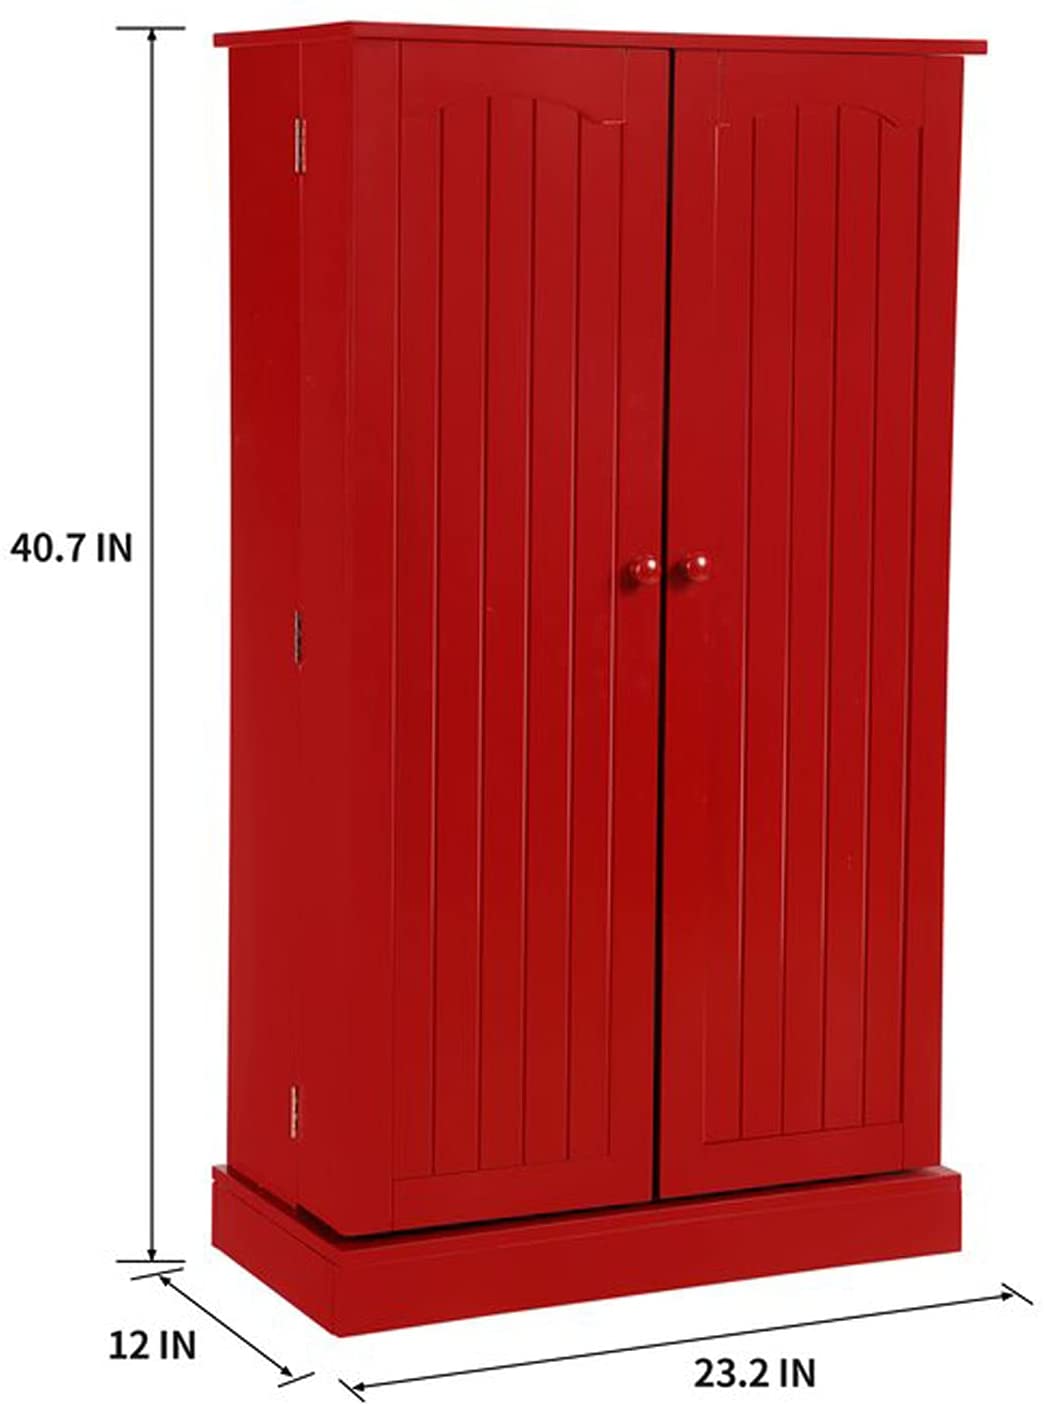 HOMEFORT 41" Kitchen Pantry, Farmhouse Pantry Cabinet, Storage Cabinet with Doors and Adjustable Shelves (Red) - image 3 of 5